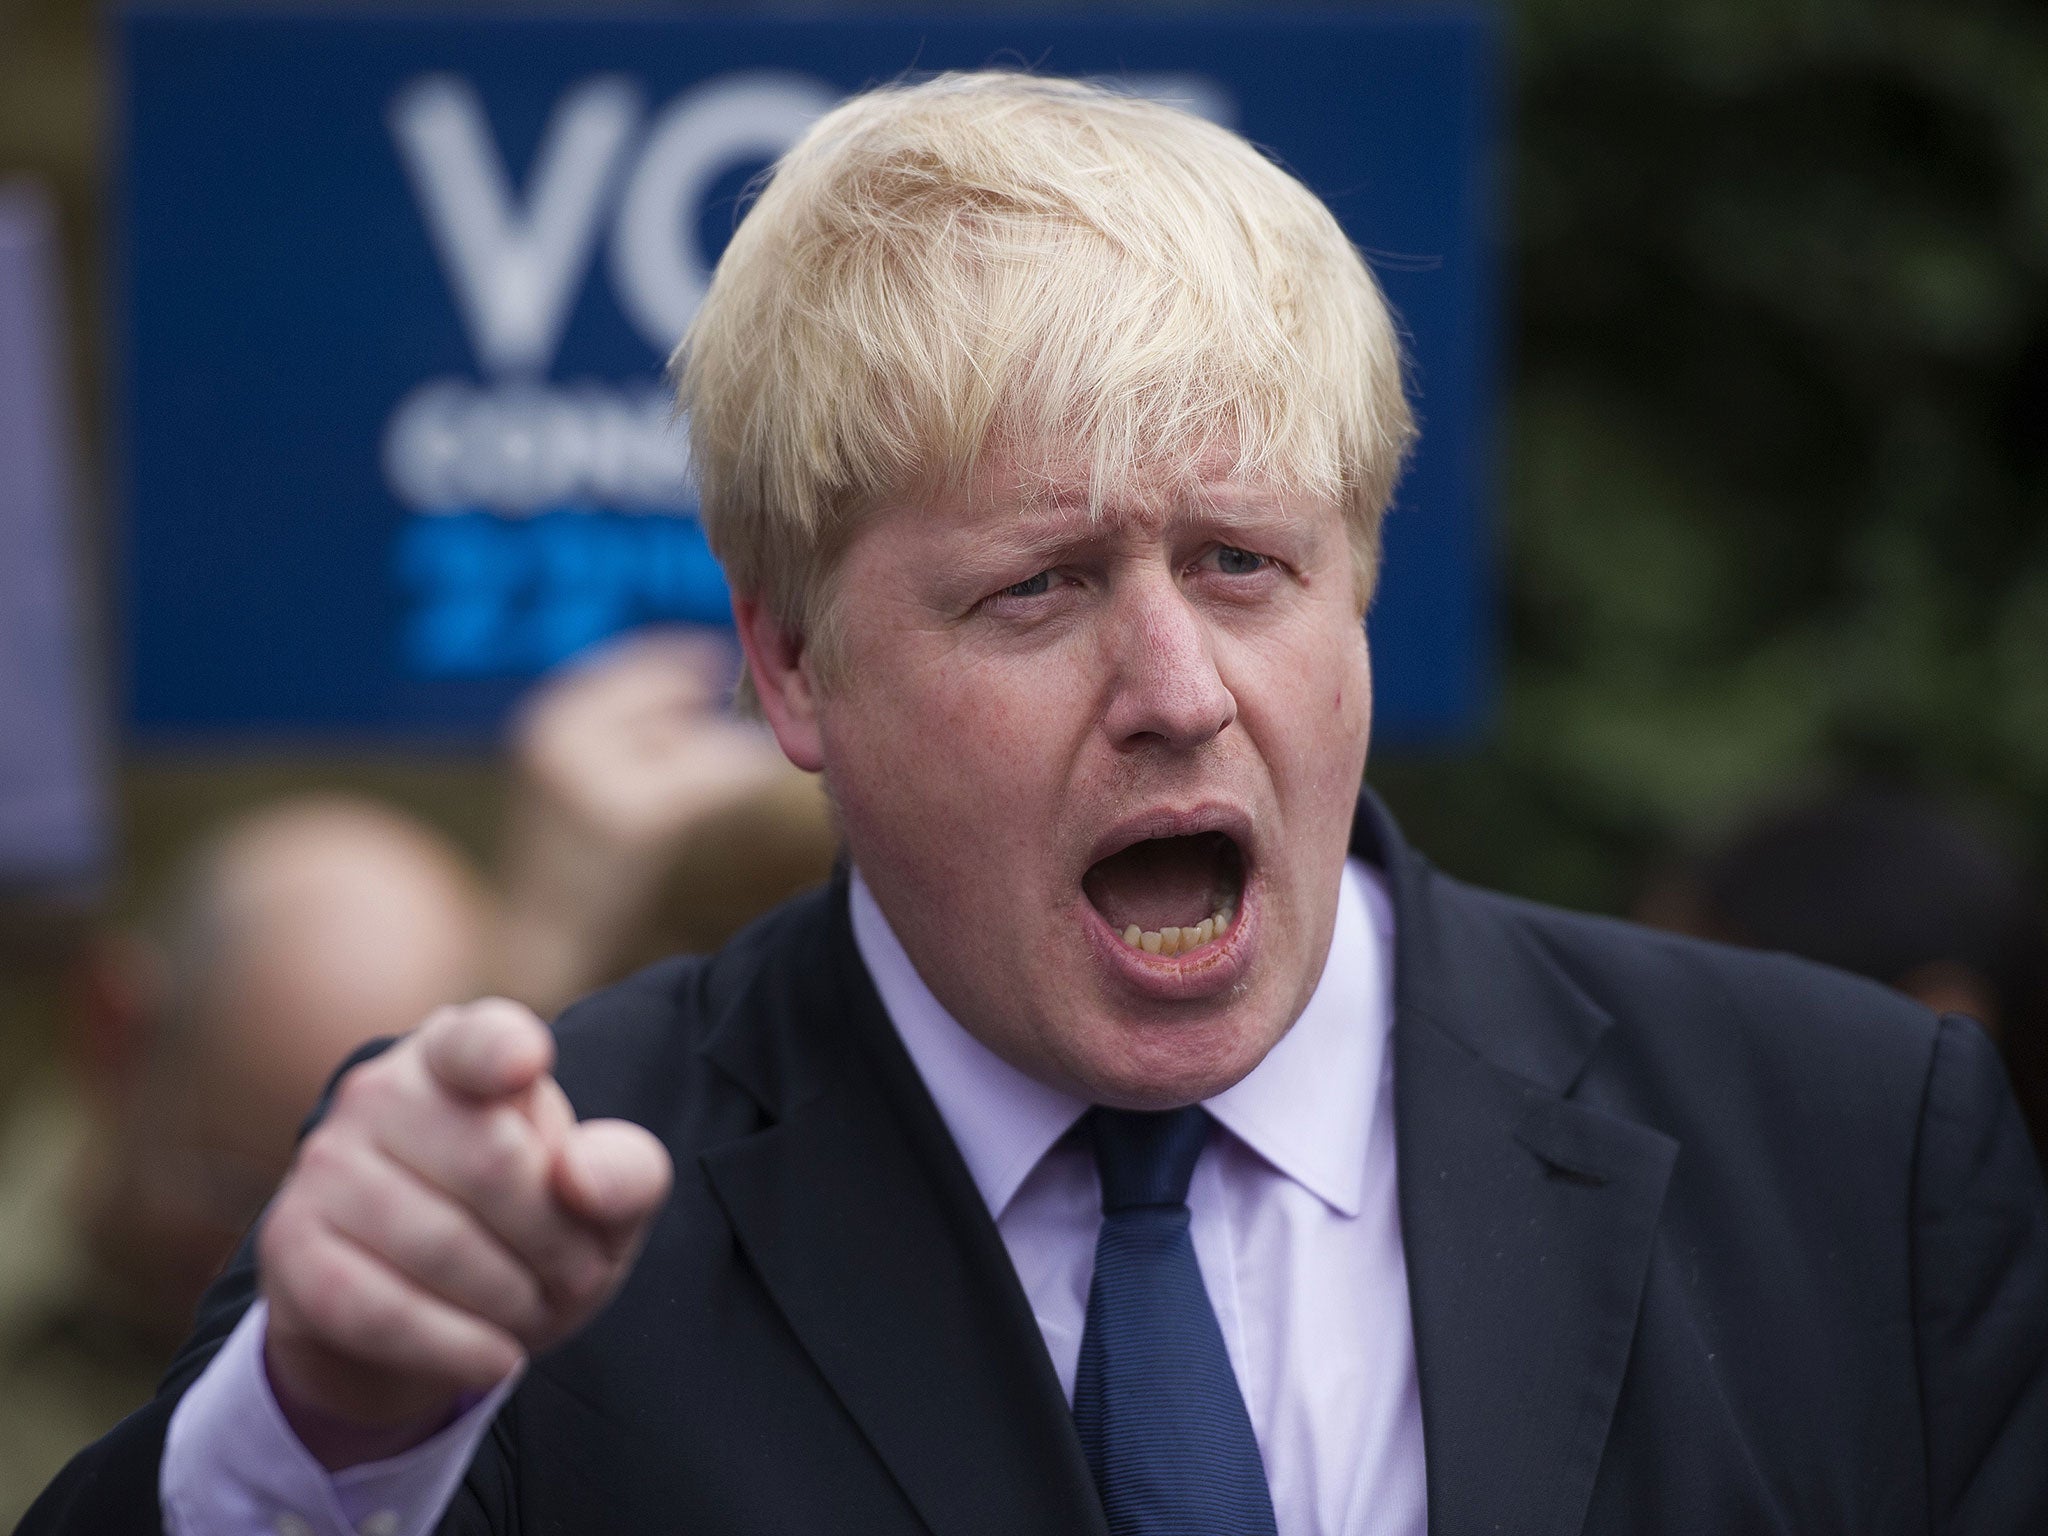 Boris Johnson said he would campaign to pull Britain out of the EU in a referendum if David Cameron's attempts to negotiate a new deal for Britain in Europe failed (Getty)